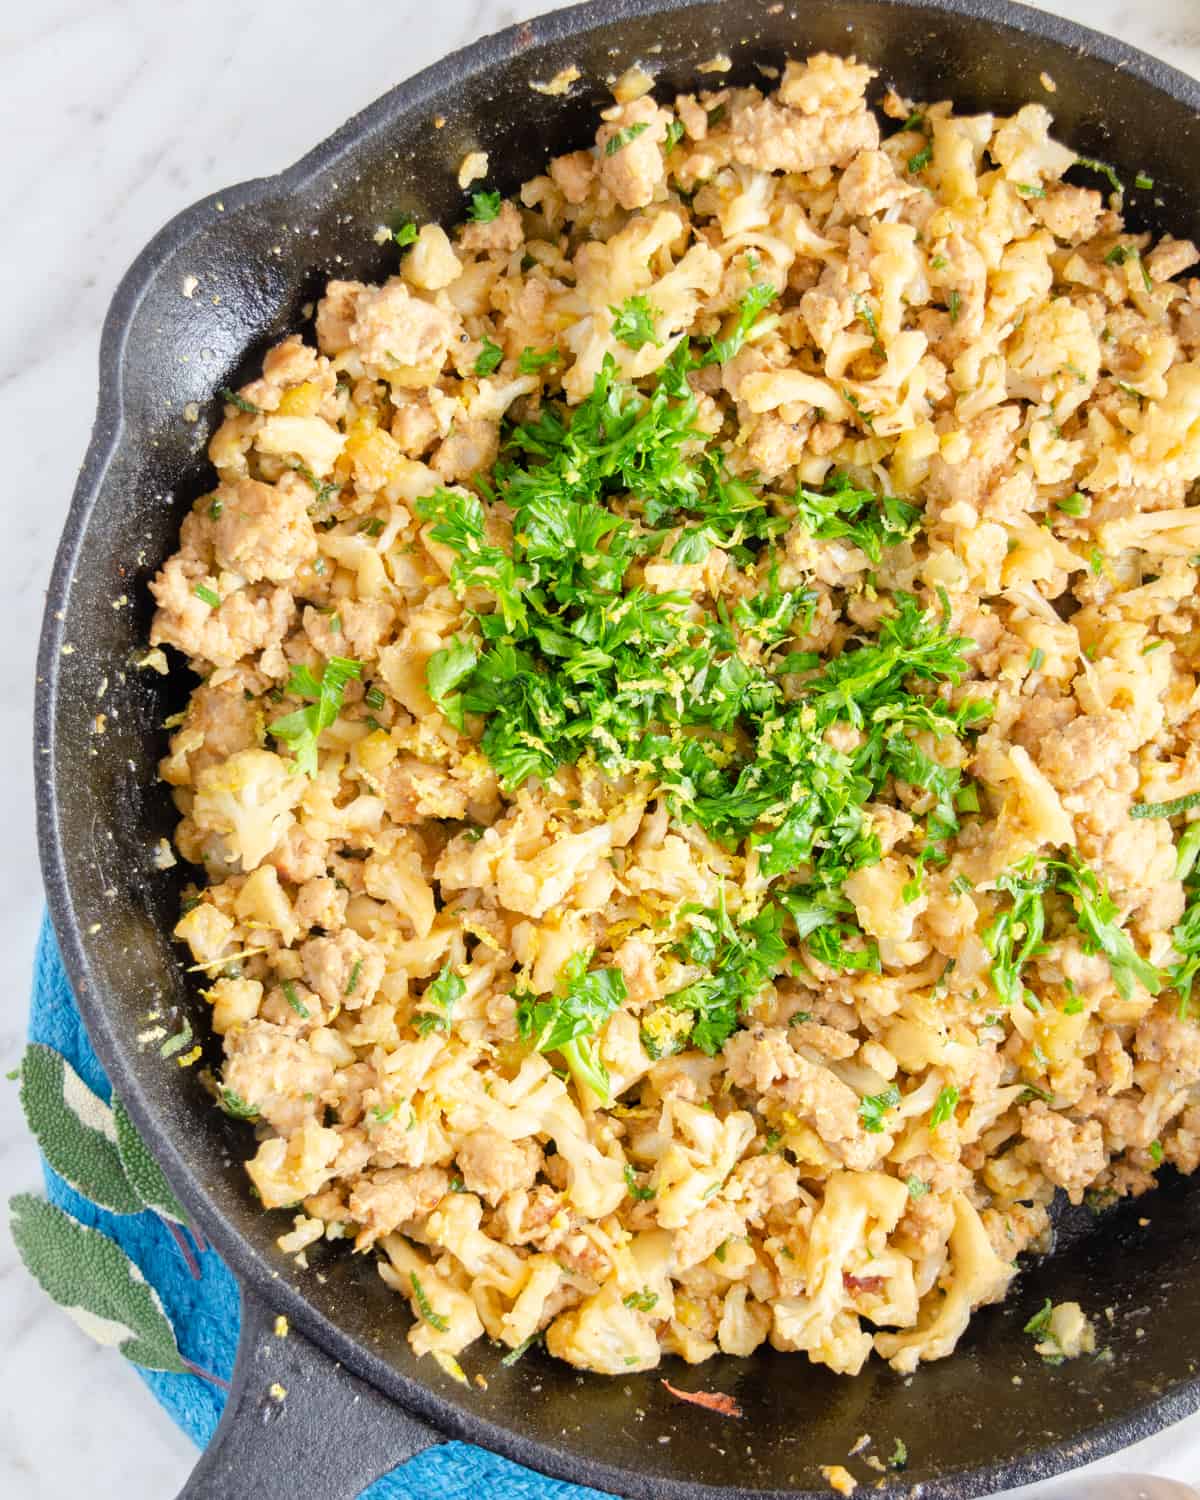 Stovetop Cauliflower stuffing in a cast iron skillet